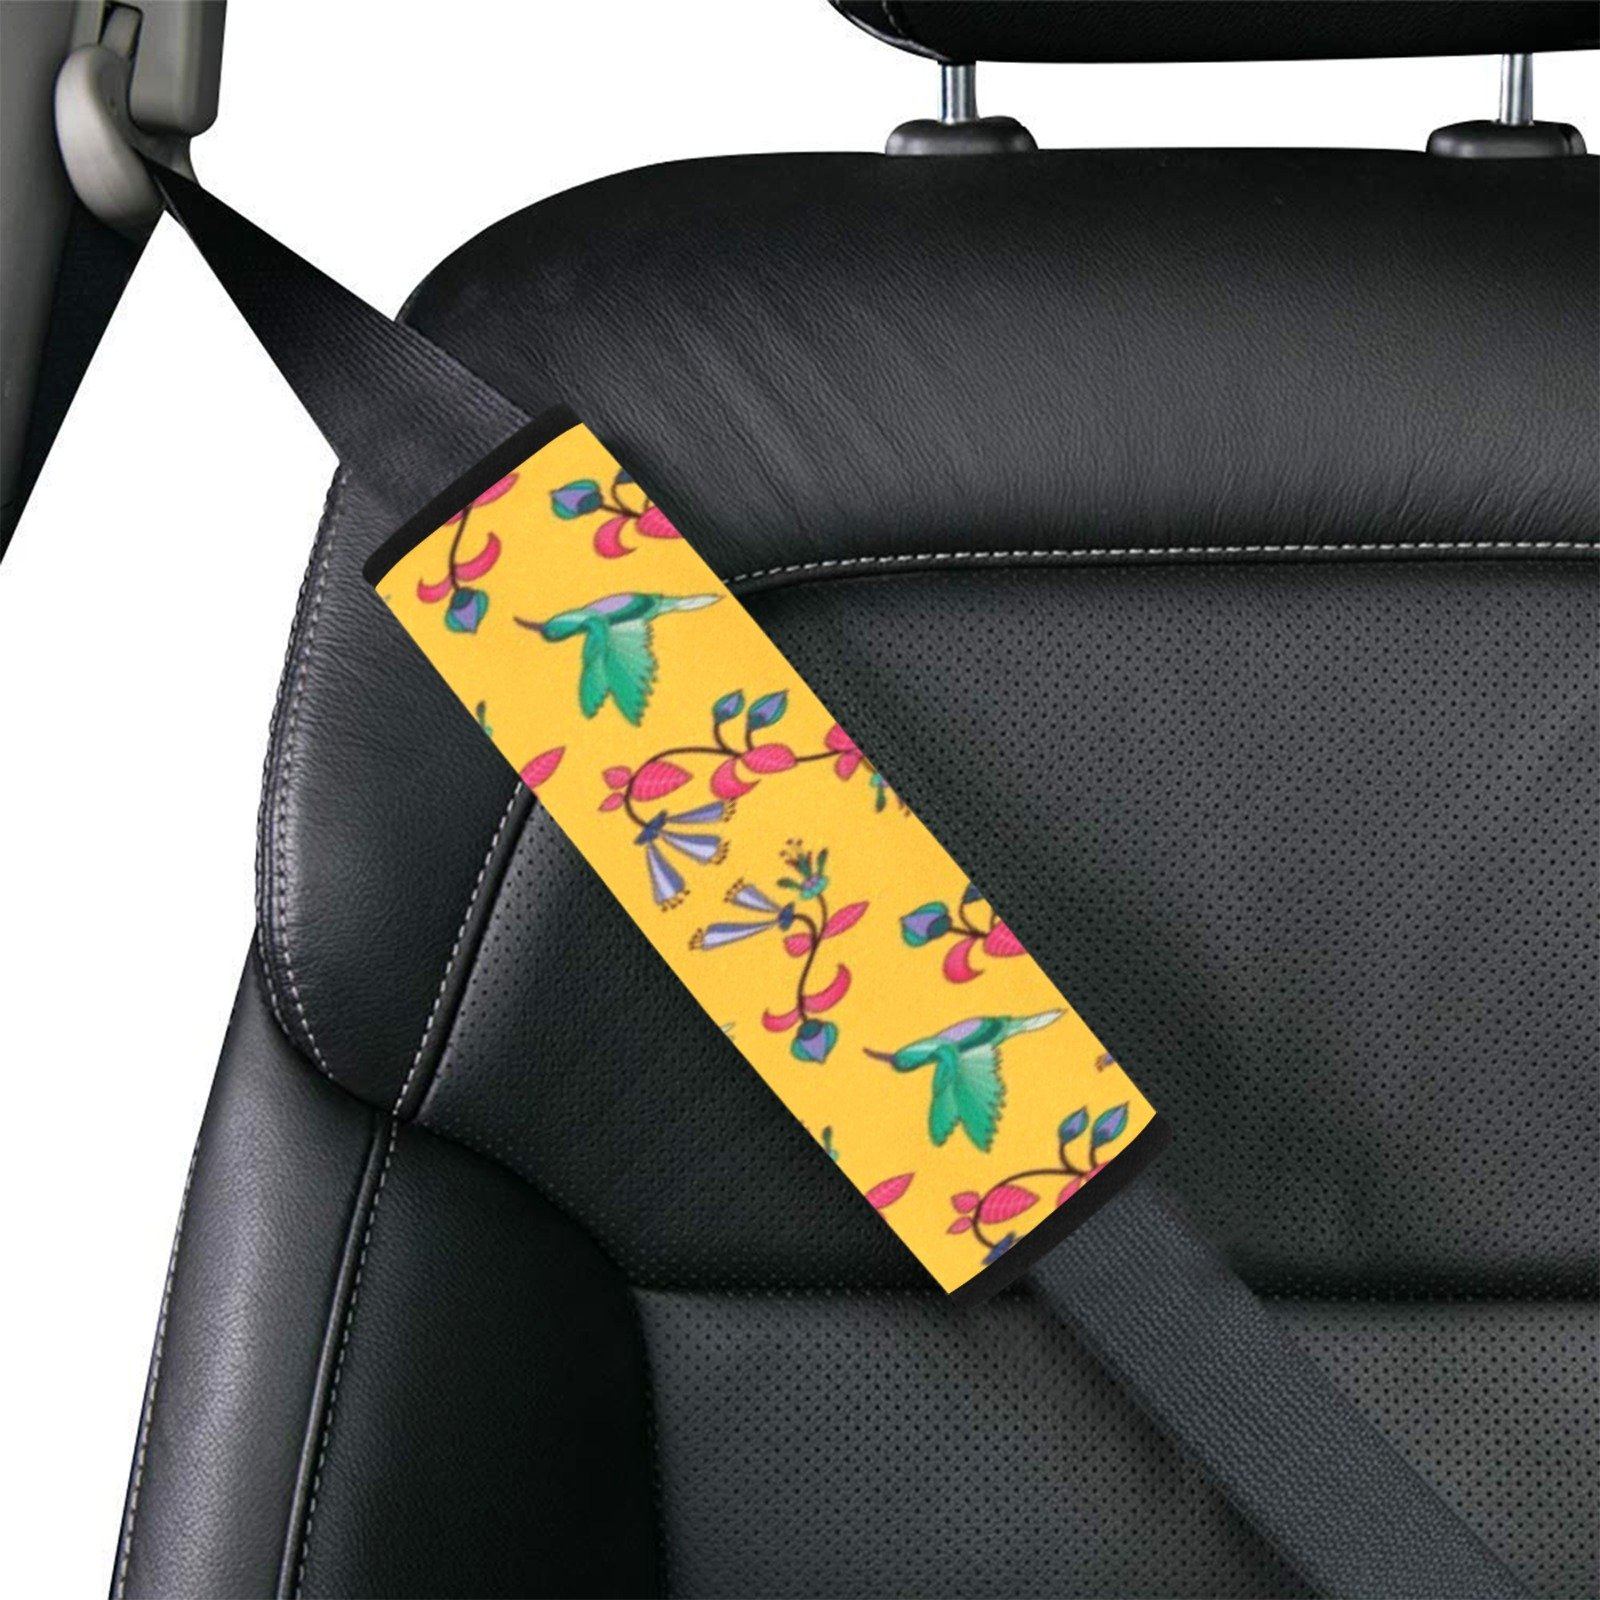 Swift Pastel Yellow Car Seat Belt Cover 7''x12.6'' (Pack of 2) Car Seat Belt Cover 7x12.6 (Pack of 2) e-joyer 